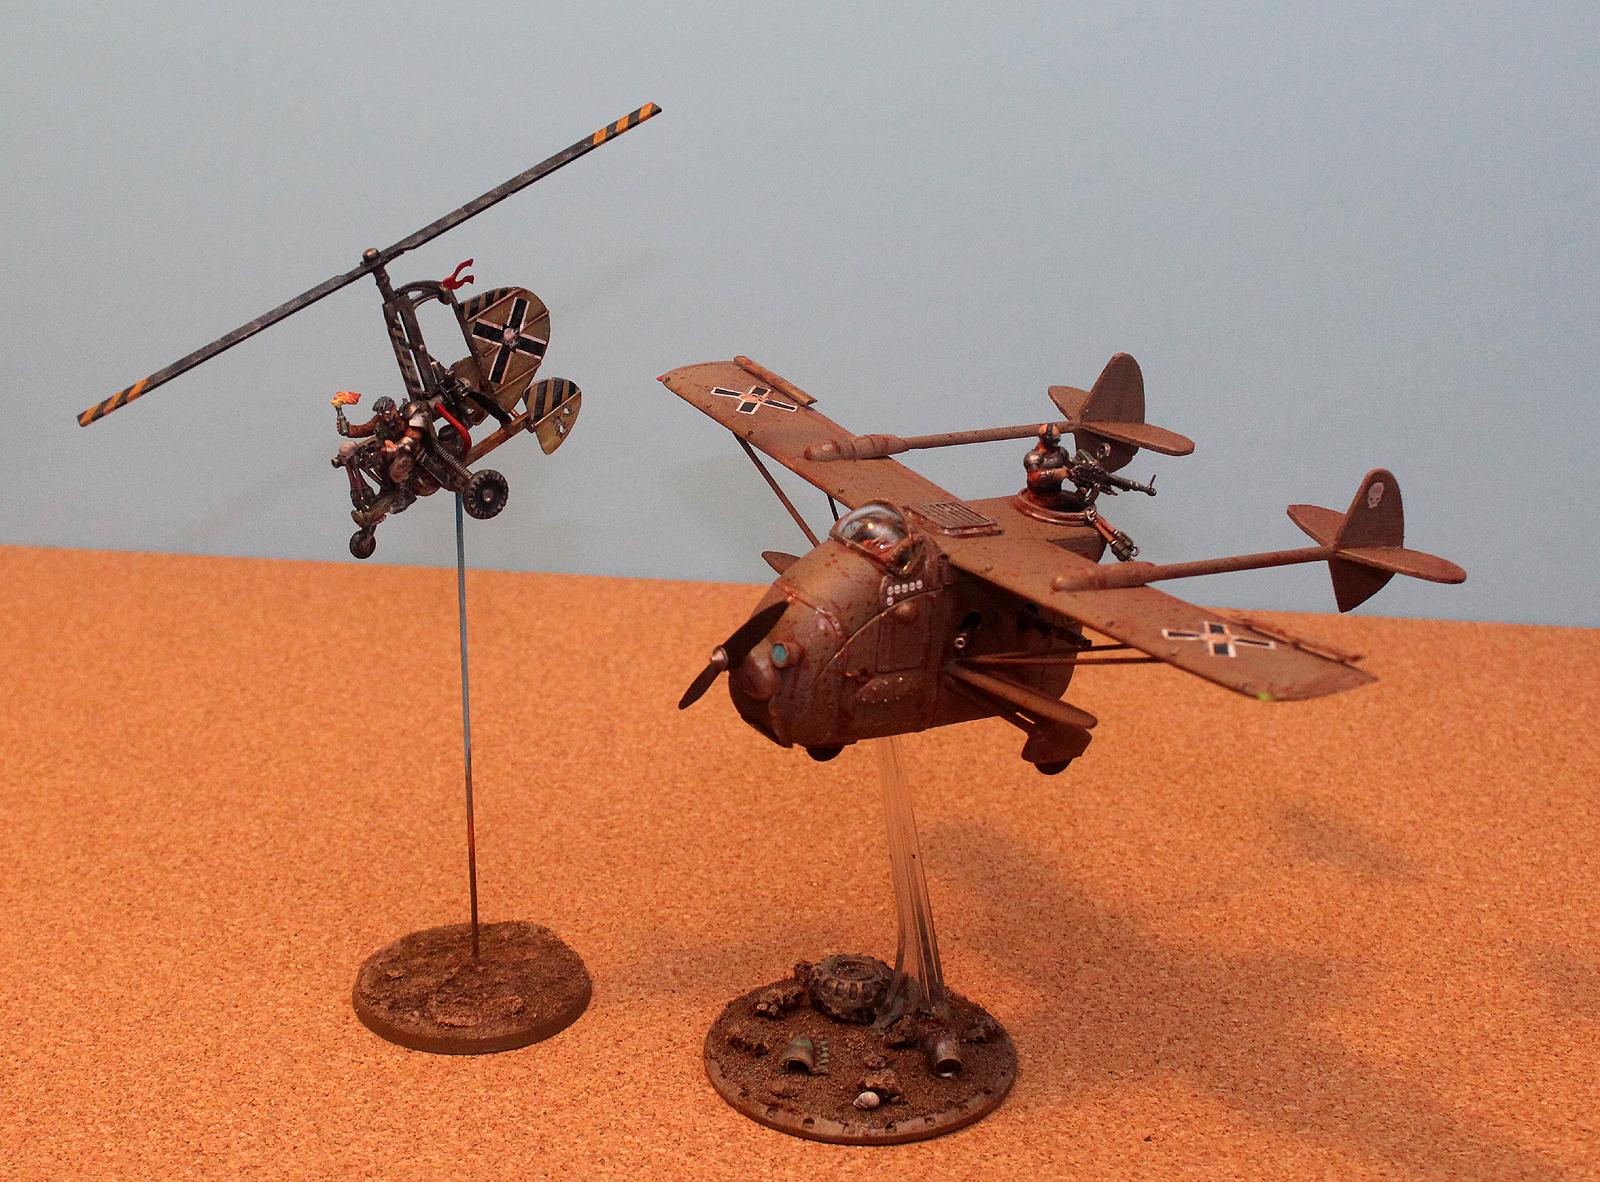 Airtruk, Apocolyptic, Fallout, Gyrocopter, Mad, Madmax, Max, Wasteland